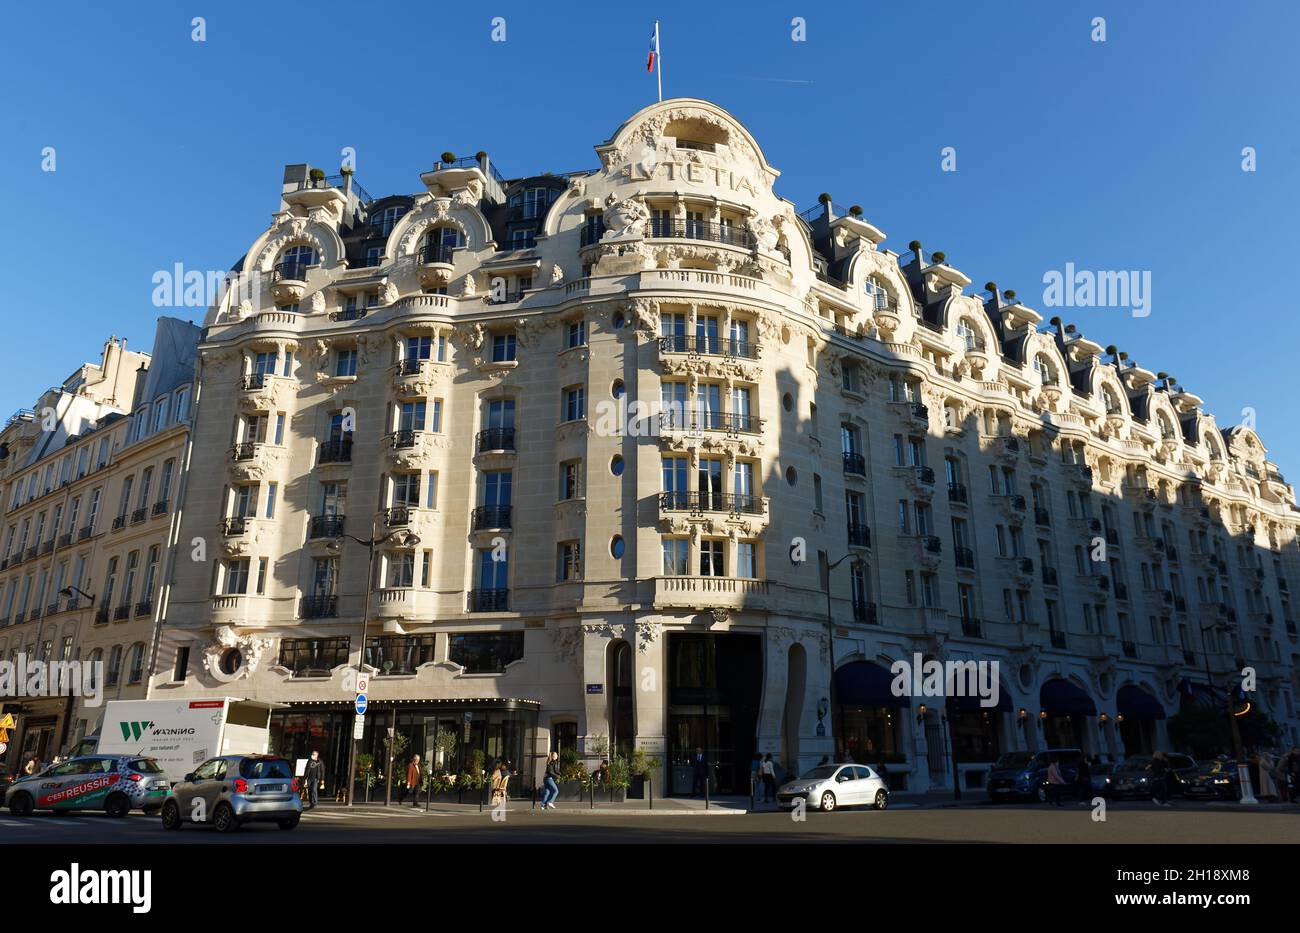 Paris, France-October 07, 2021 : The Hotel Lutetia, is one of the best-known hotels on the Left Bank in Paris, France.The Lutetia was built in 1910 in Stock Photo